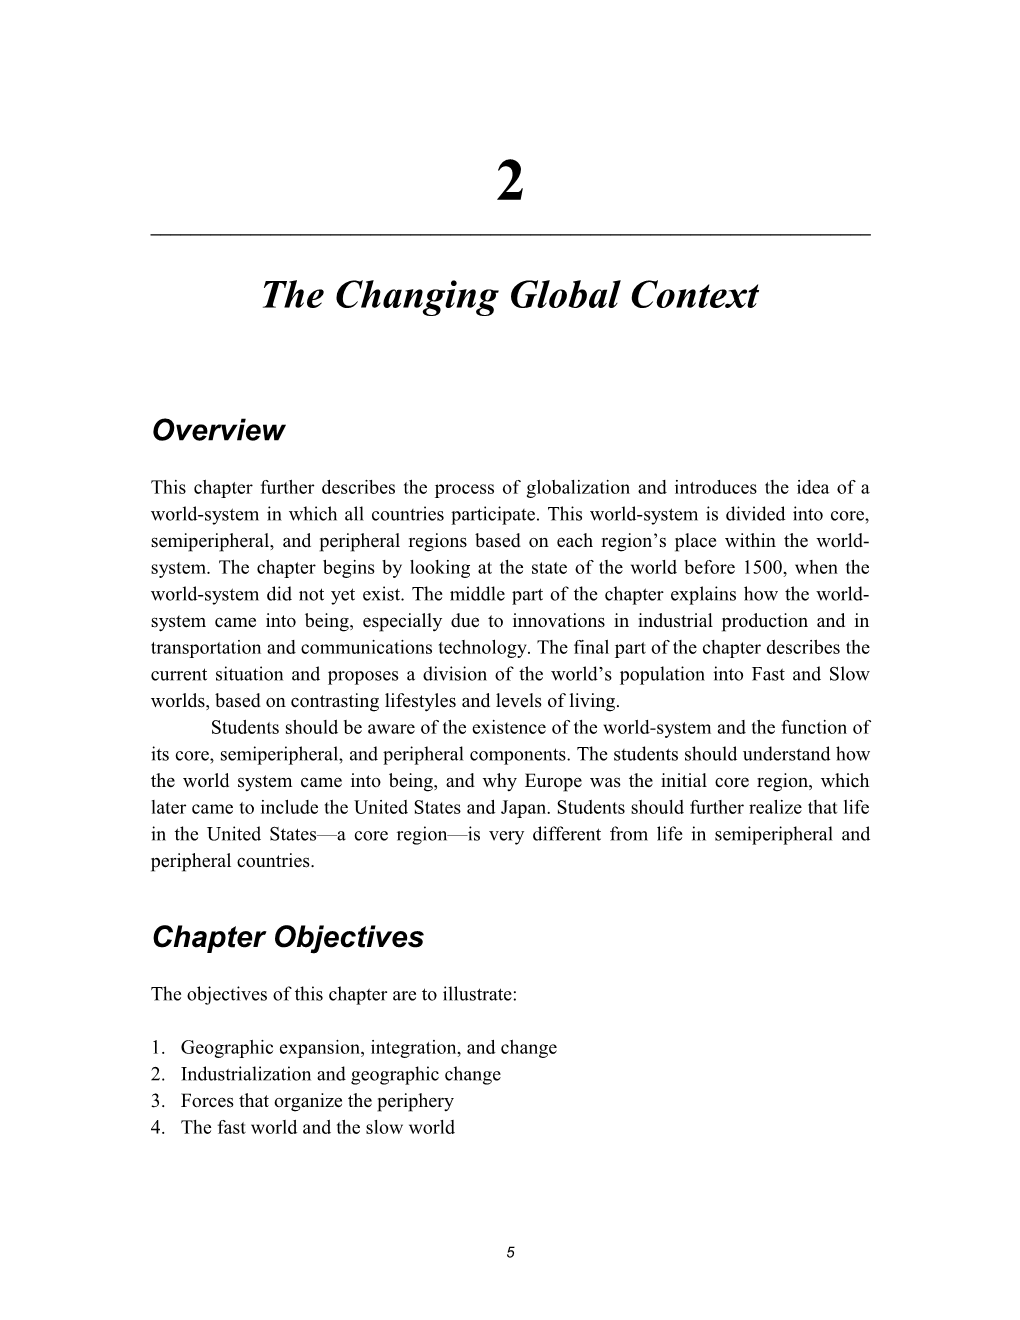 The Changing Global Context